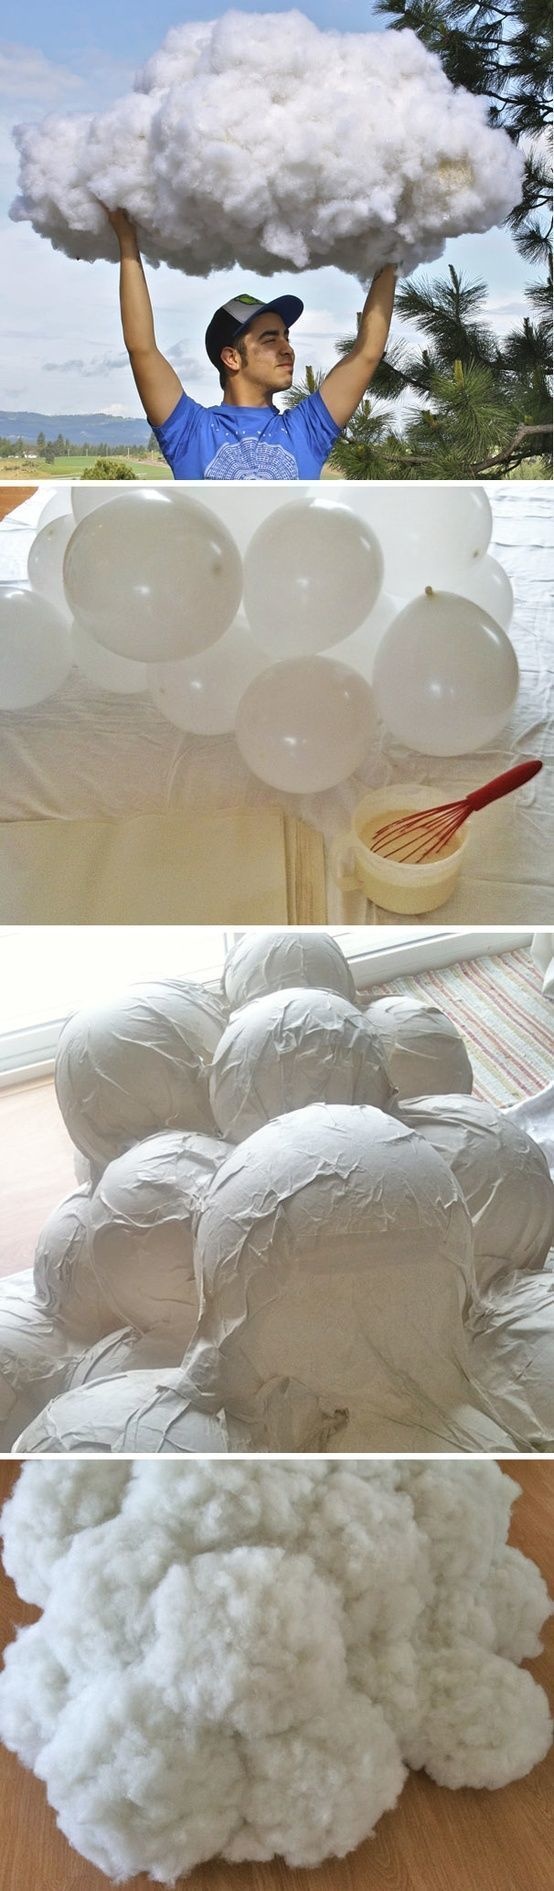 AD-Amazing-Things-You-Didn’t-Know-You-Could-With-Balloons-2